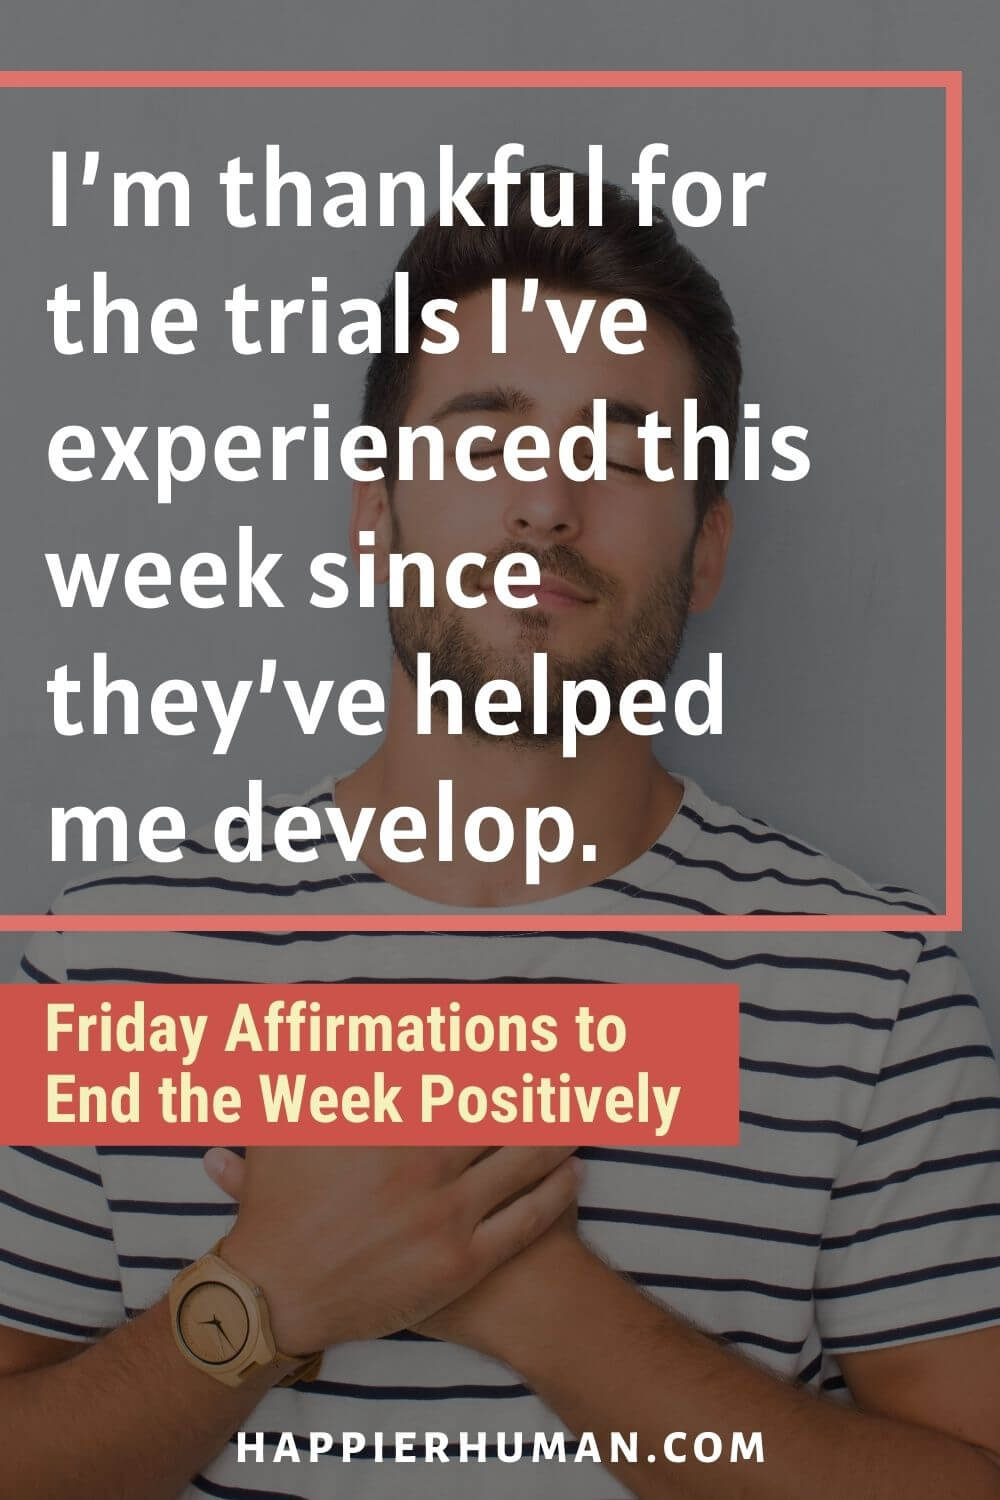 Friday Affirmations - I’m thankful for the trials I’ve experienced this week since they’ve helped me develop. | funny friday affirmations | weekend affirmations | saturday affirmations